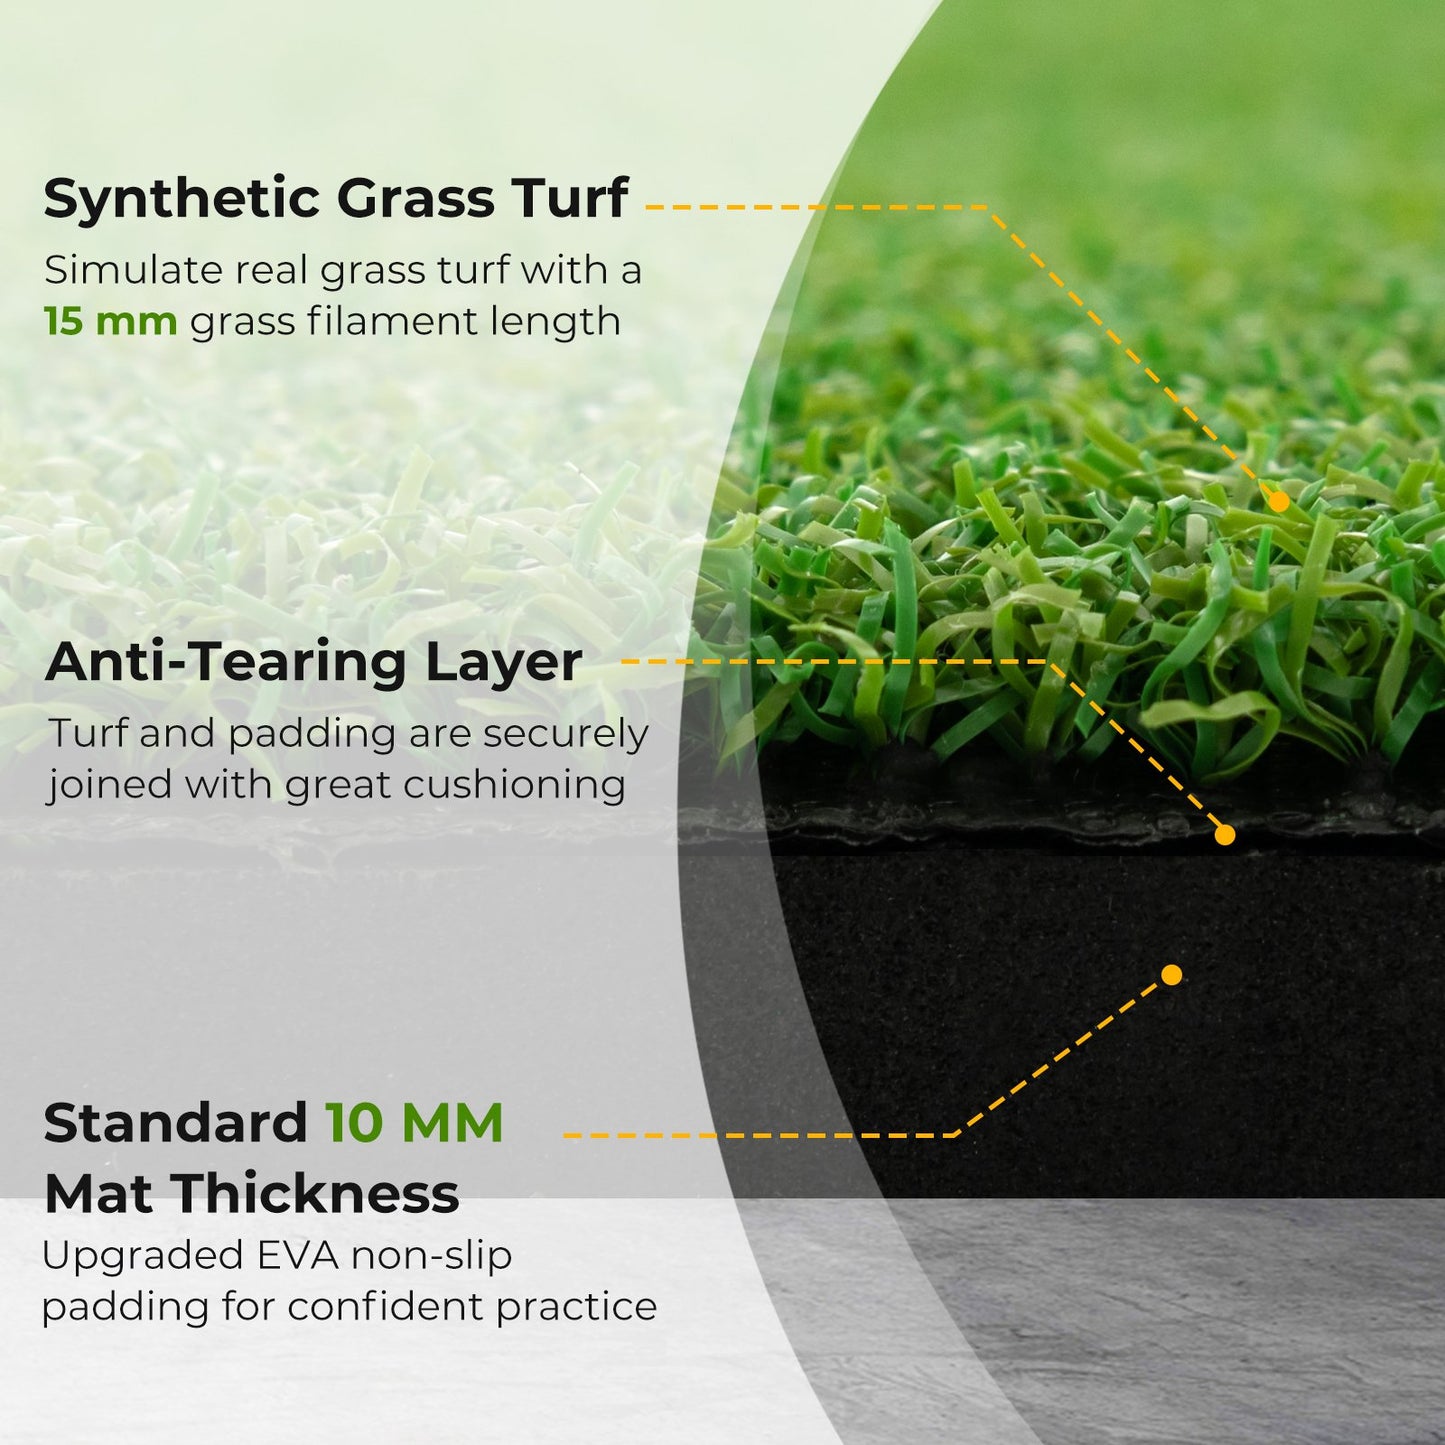 5 x 3 ft Artificial Turf Grass Practice Mat for Indoors and Outdoors-25mm, Green Golf   at Gallery Canada